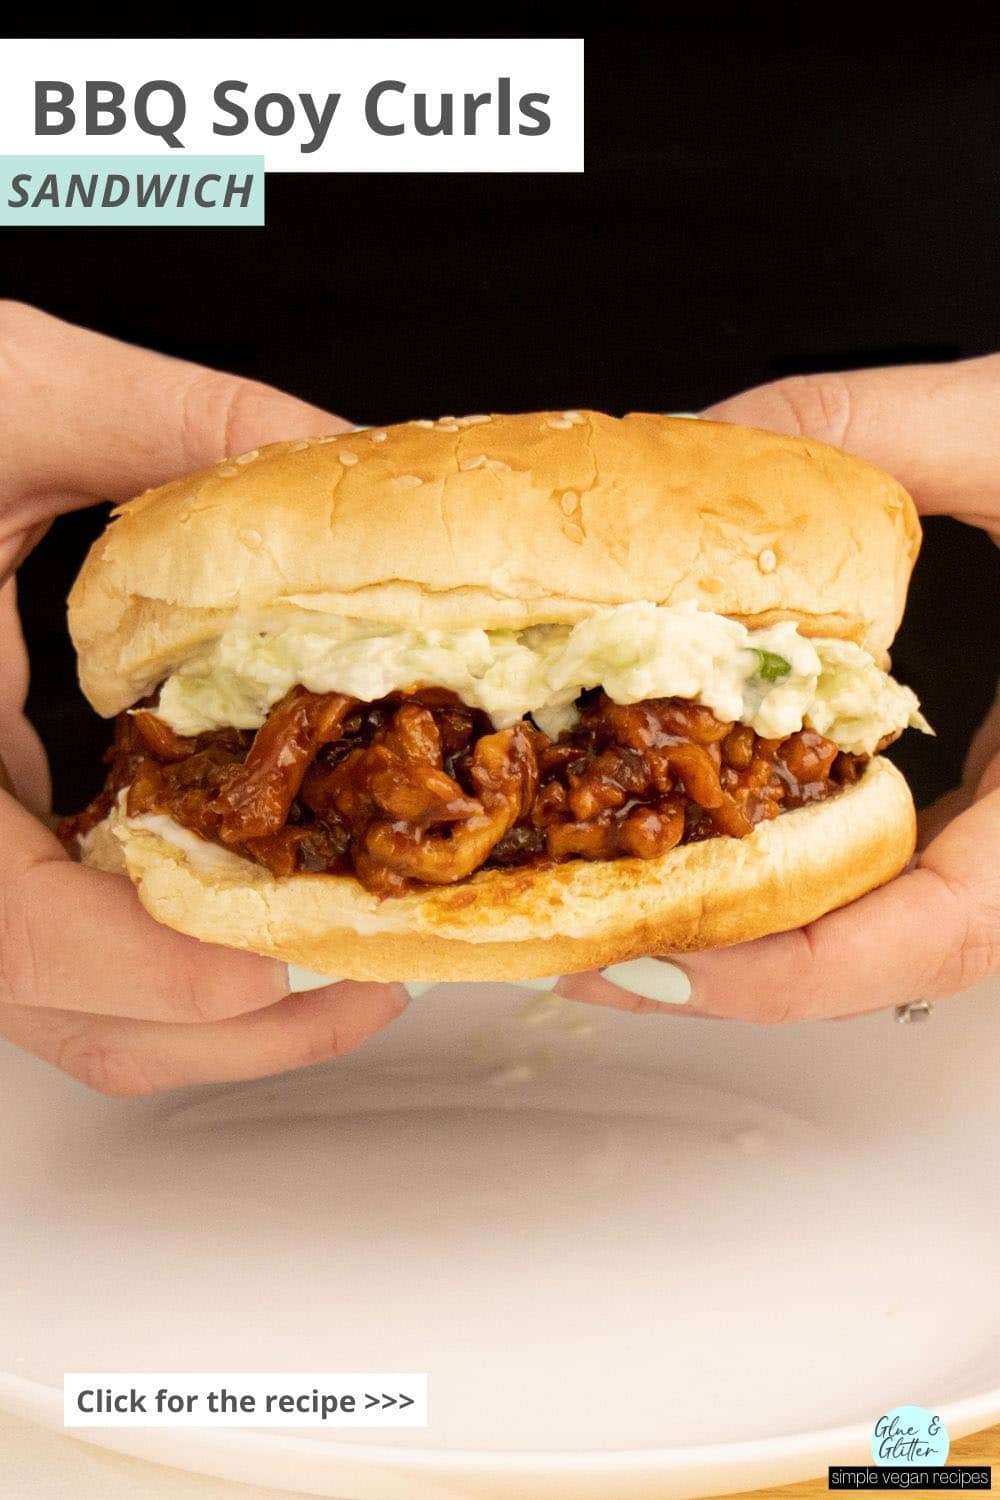 hands holding a BBQ soy curls sandwich, text overlay